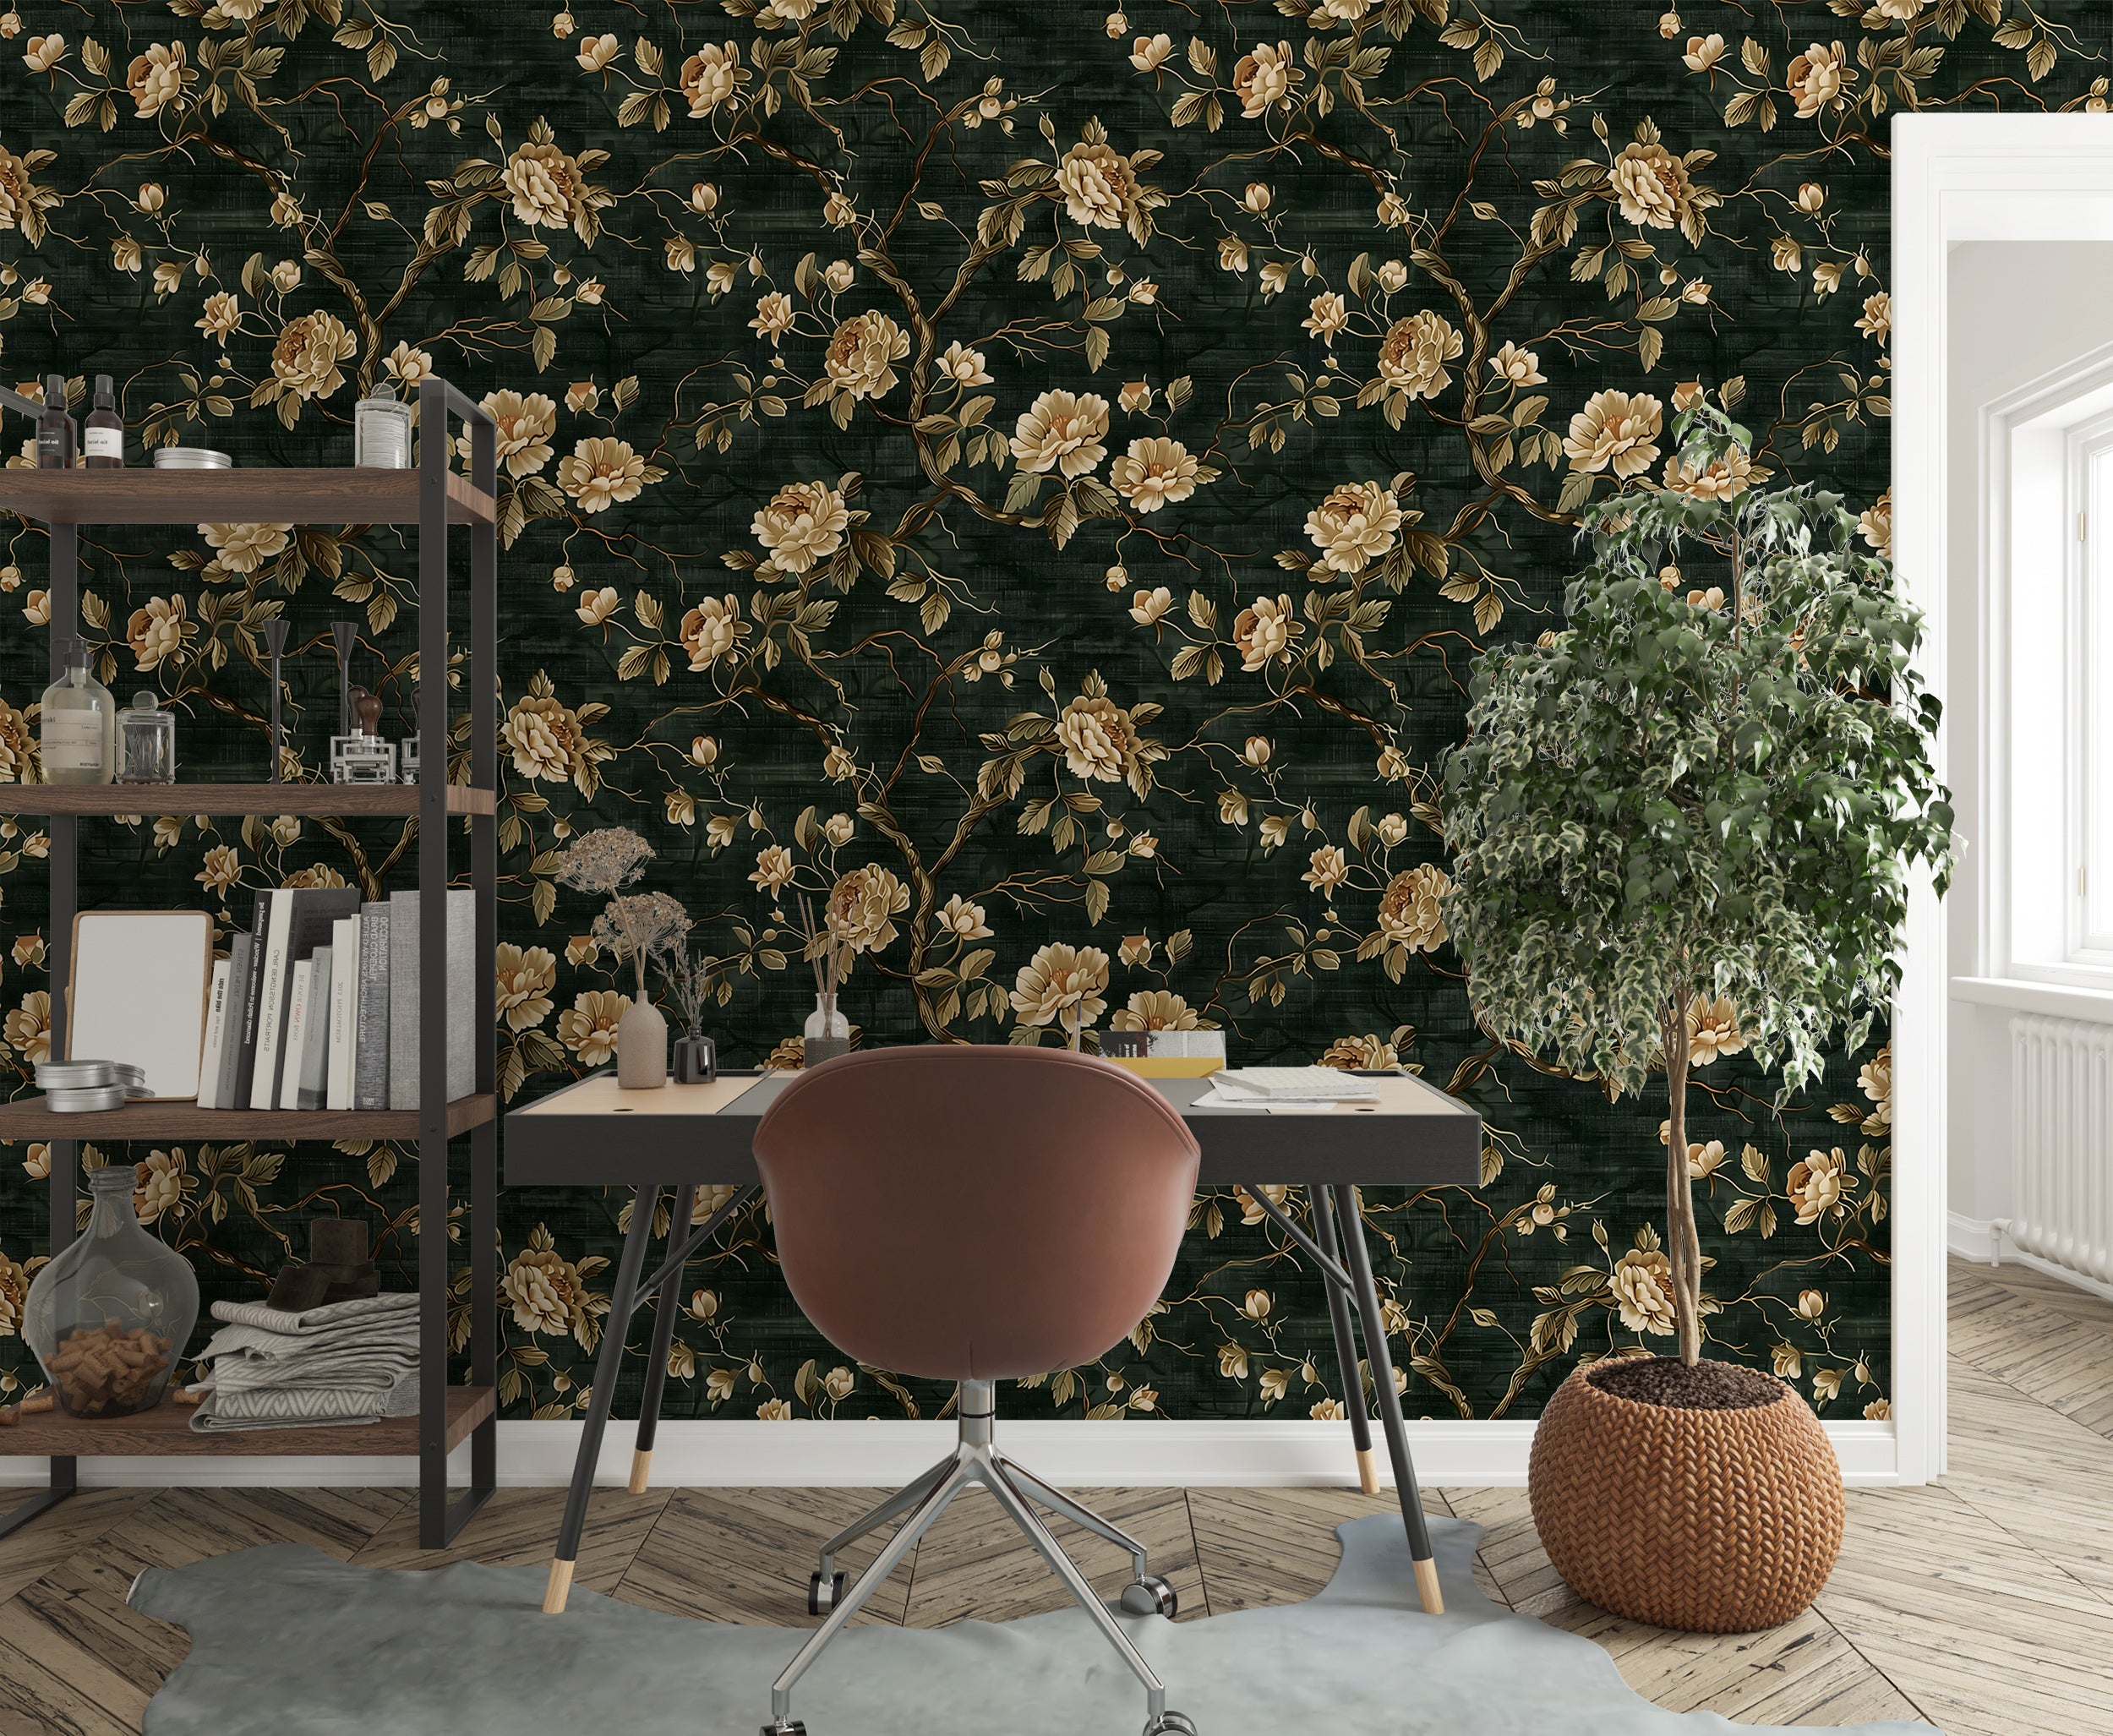 Timeless botanical wallpaper with beige roses